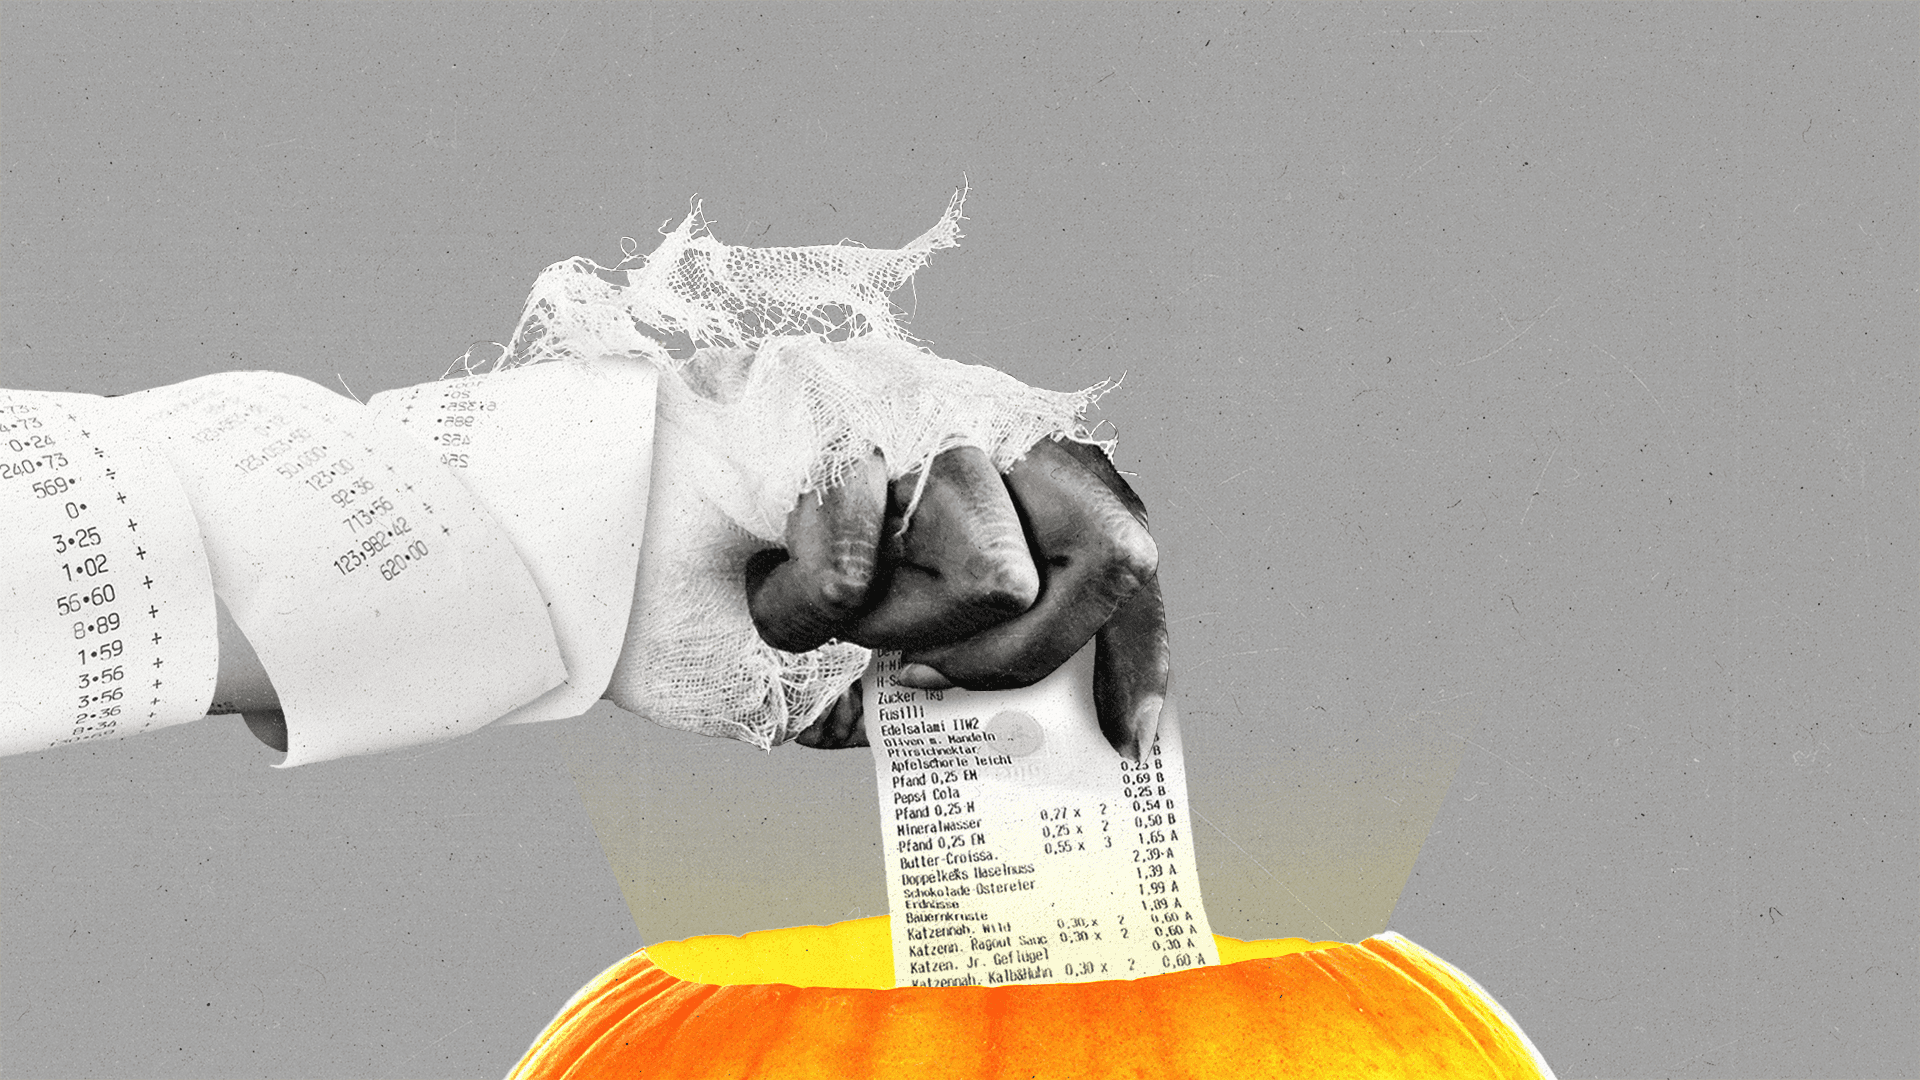 Mummy hand wrapped in receipt paper pulls an itemized receipt out of a glowing jack-o-lantern.